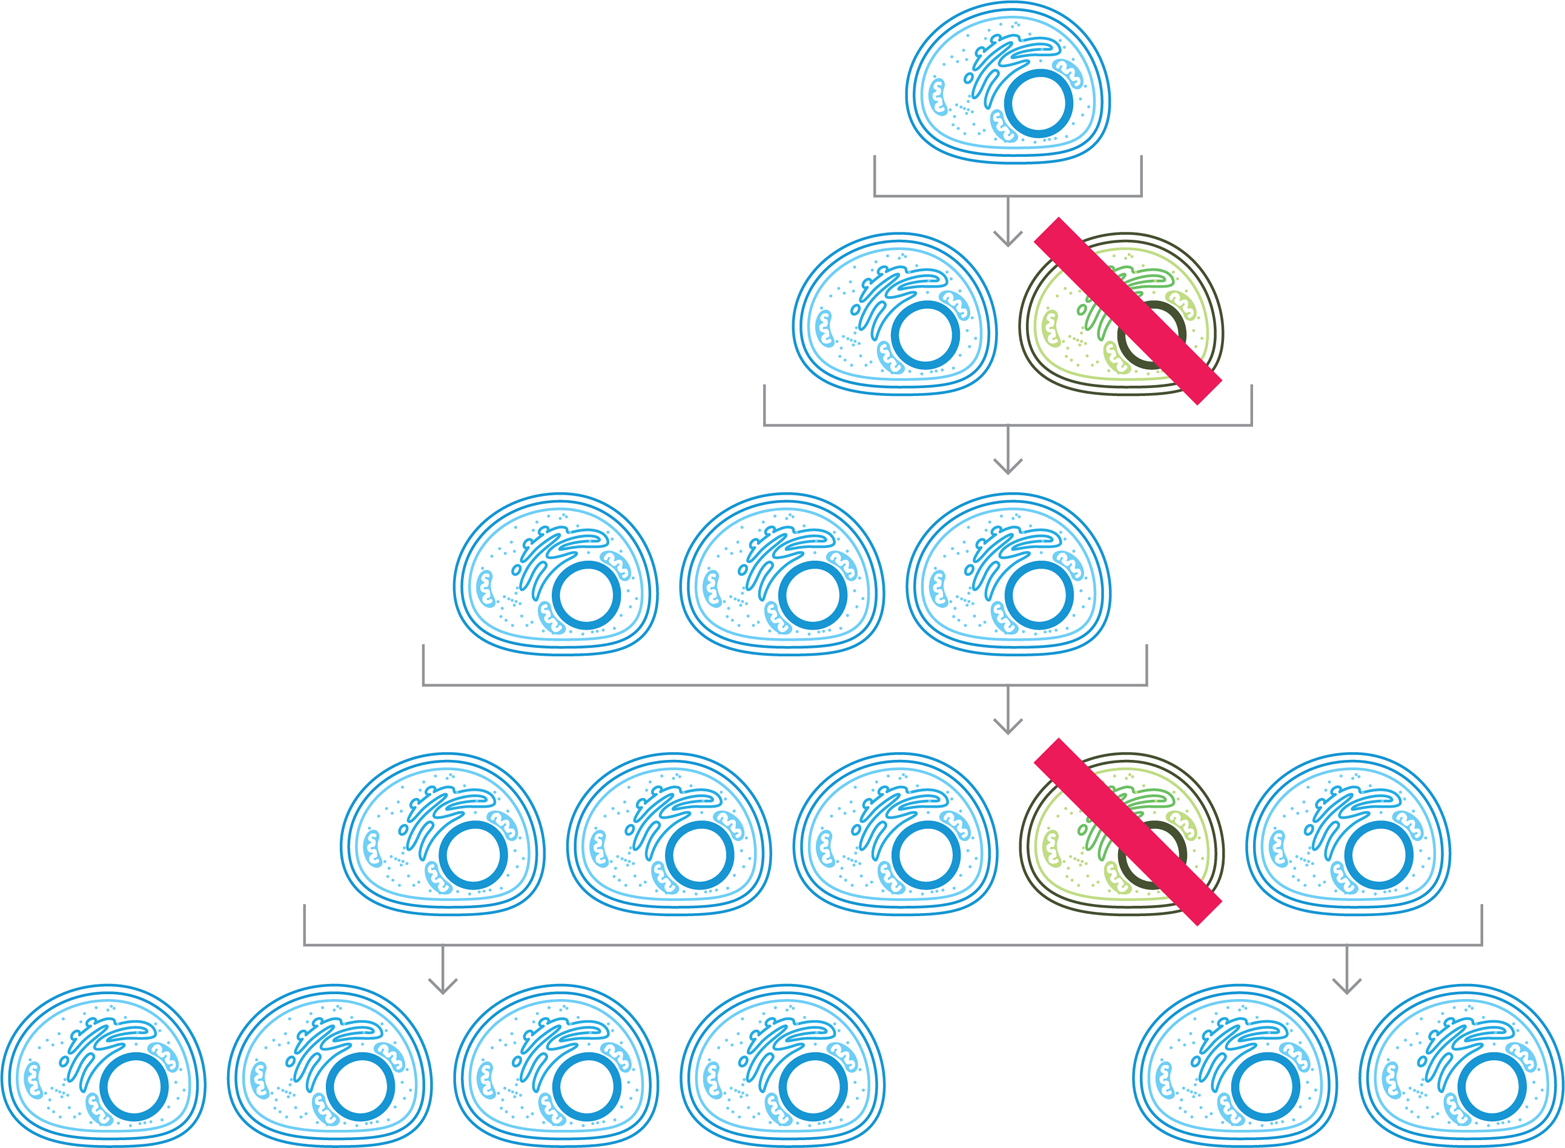 A self-correcting system. Division of an engineered cell (top, blue) can create an exact copy (second row, blue) or it can lead to the production of a genetic variant (second row, green) that may not carry out the desired function. To keep these undesired variants from persisting in the population, engineers can design components to kill these cells, as indicated by the red line, to ensure that the system functions reliably.